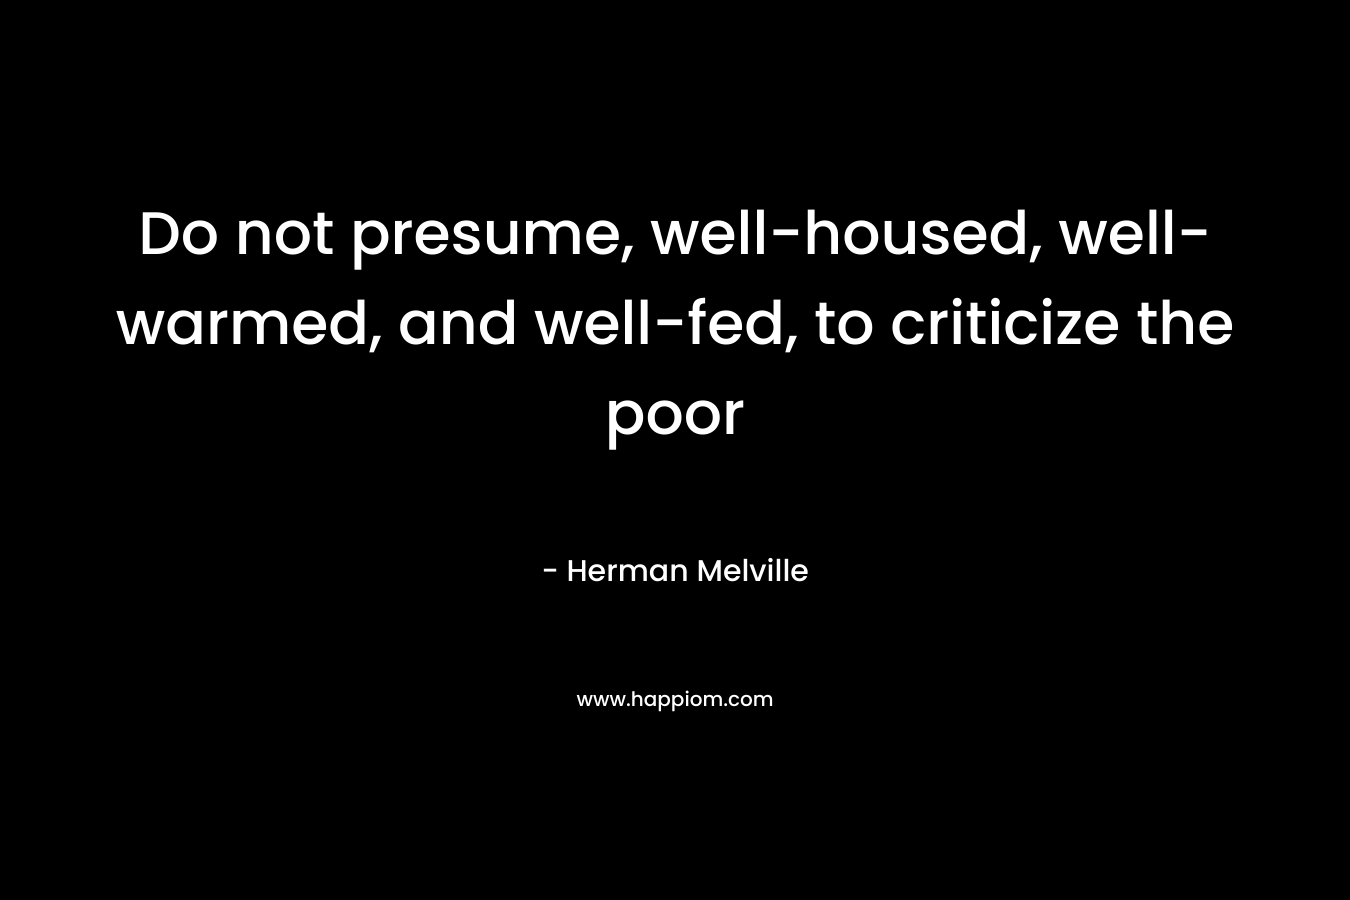 Do not presume, well-housed, well-warmed, and well-fed, to criticize the poor